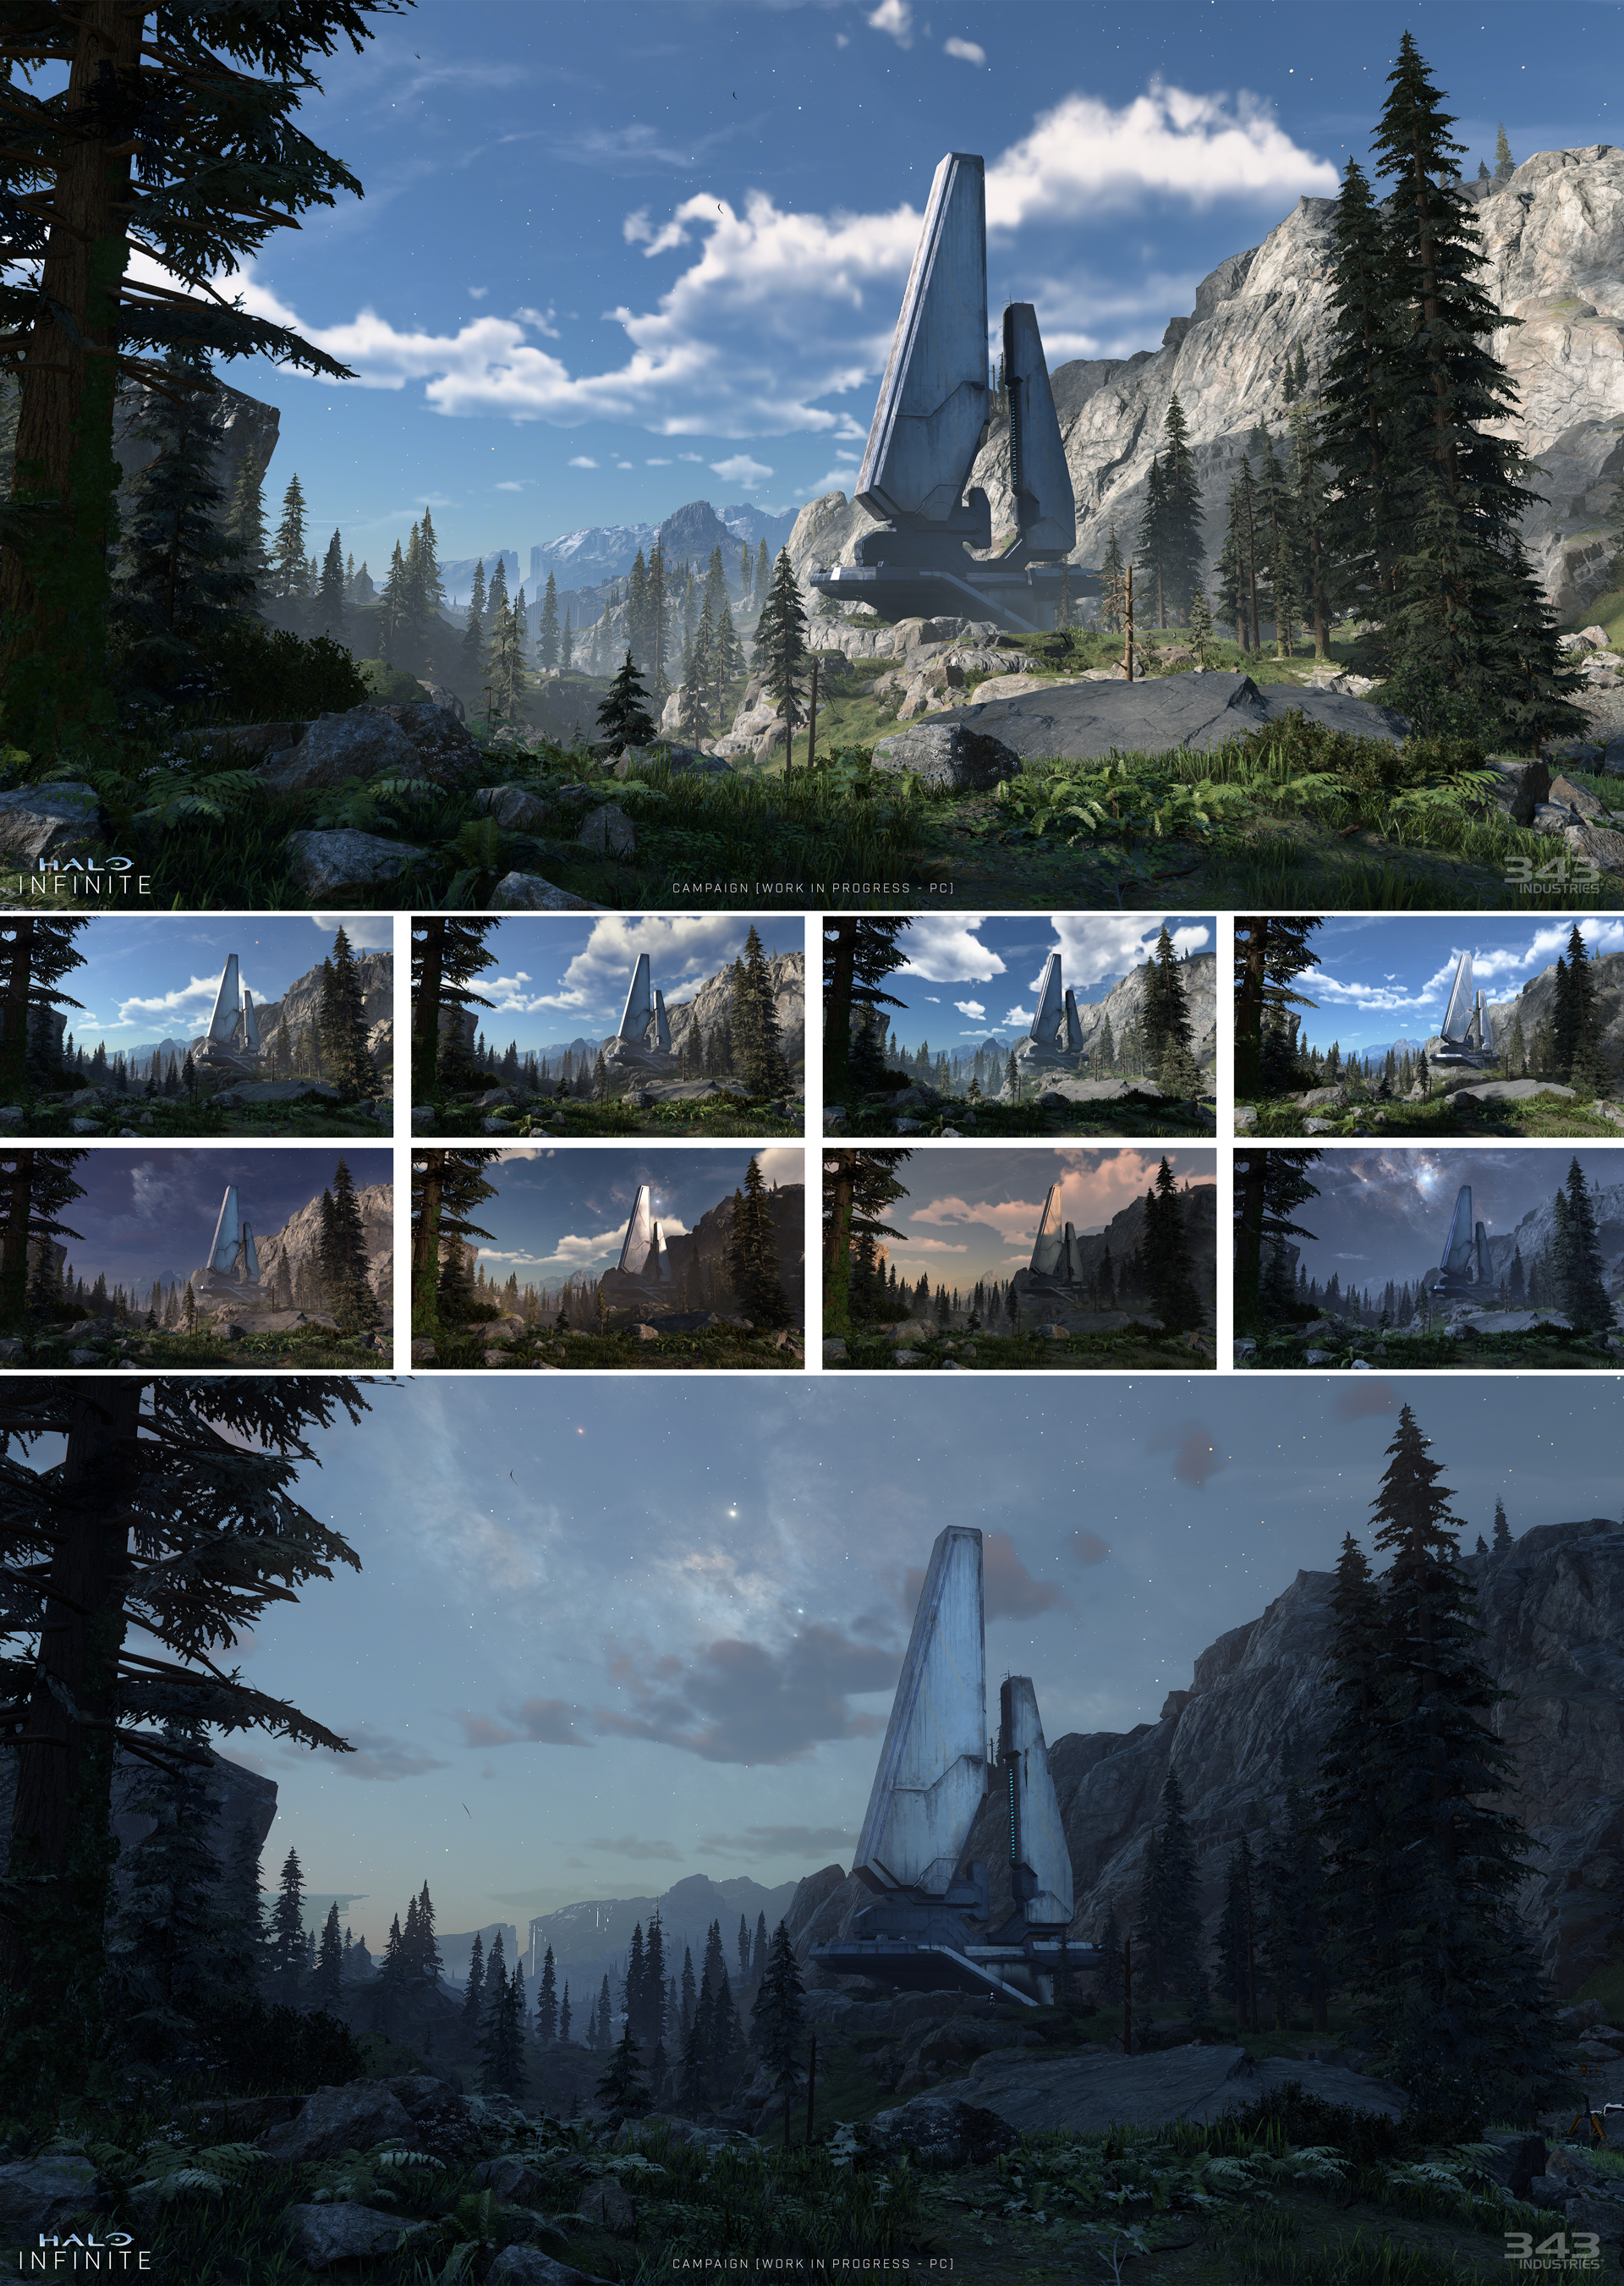 Halo Infinite's time-of-day lighting system, transition from day to night